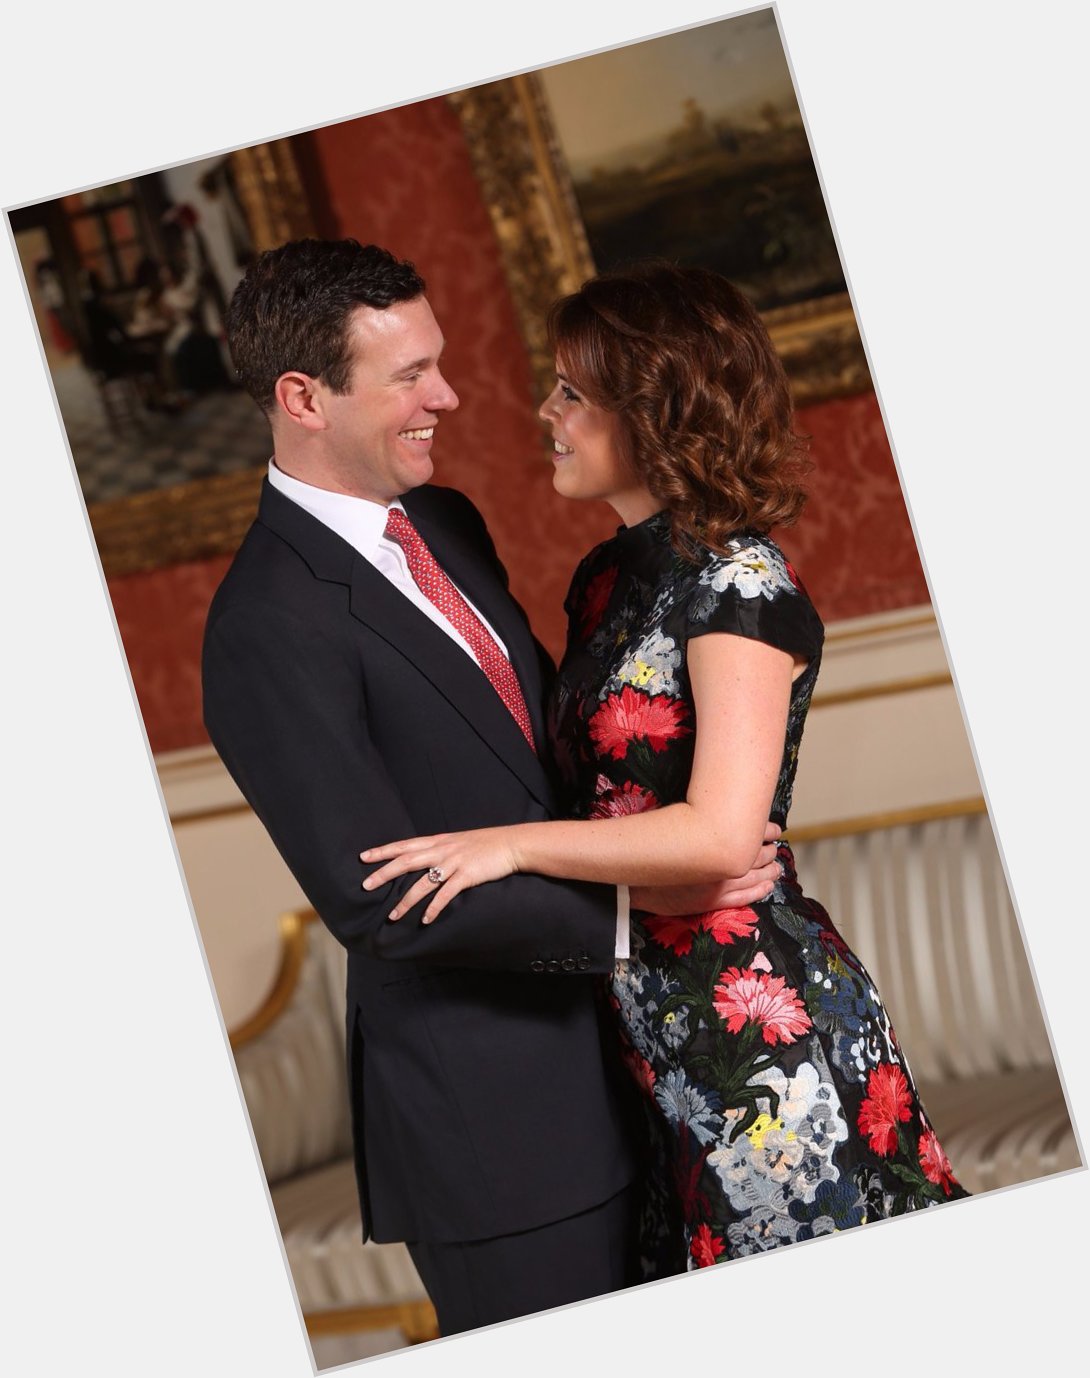 Happy Birthday to Princess Eugenie who turns 28 today and who was recently engaged to Jack Brooksbank 